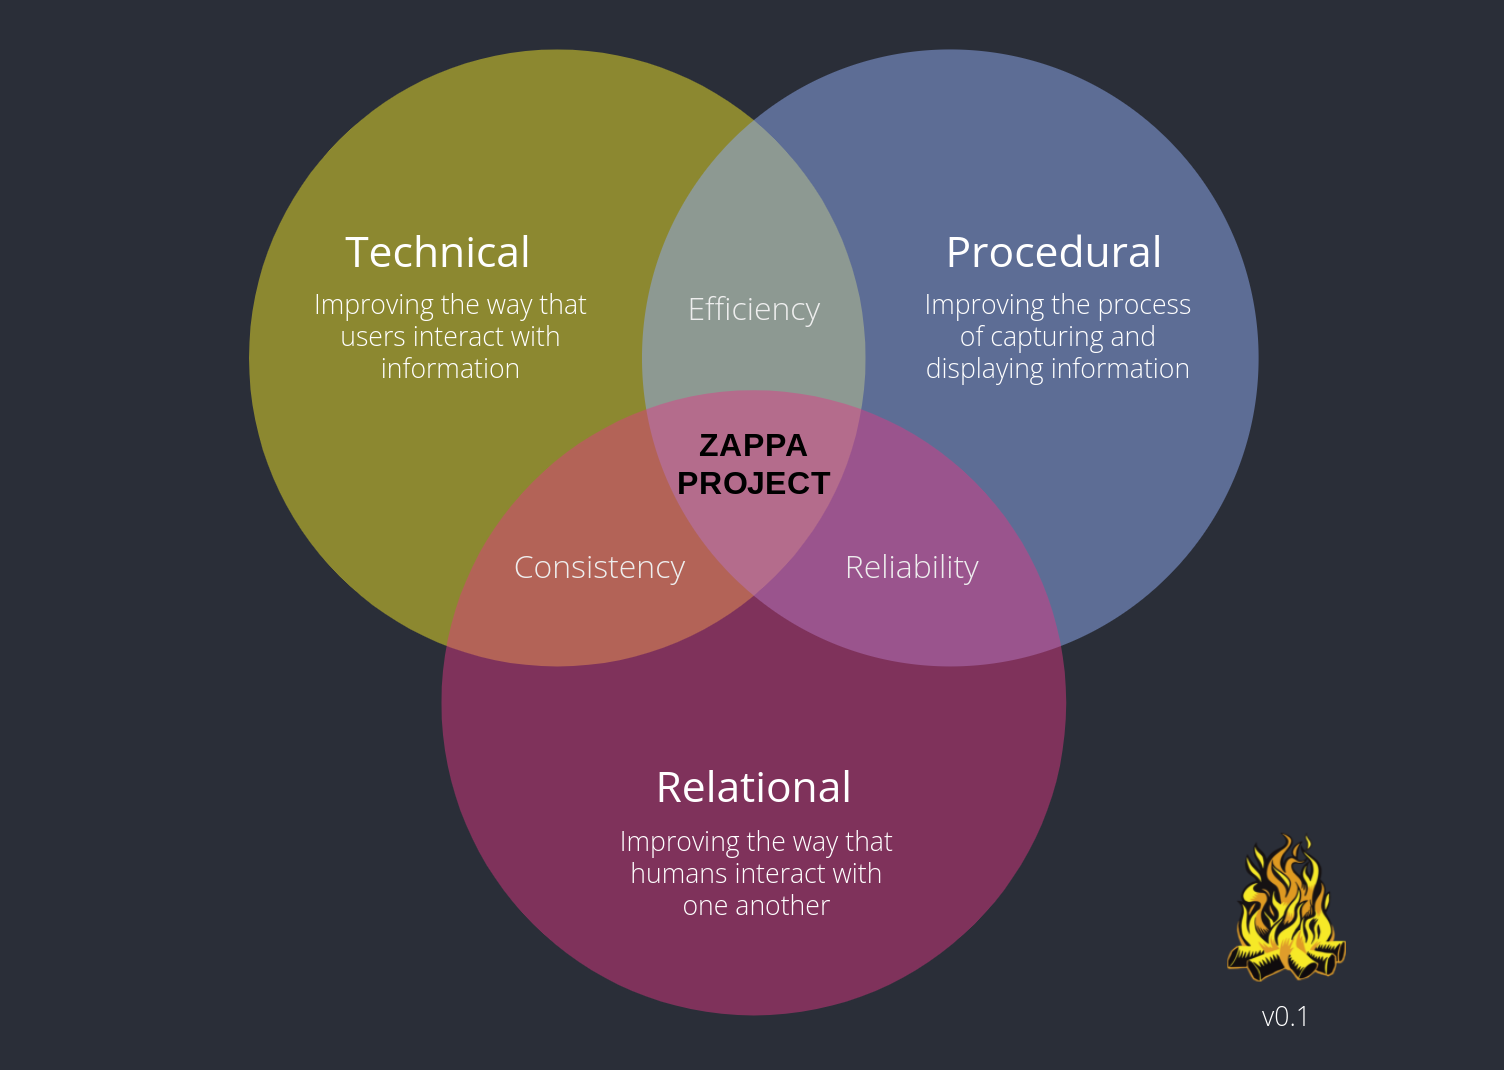 Venn diagram showing three overlapping circles (Technical, Procedural, and Relational)

At the overlap of all three circles is the words 'Zappa Project'

At the overlap of Technical and Relational is the word 'Consistency'

At the overlap of Procedural and Relational is the word 'Reliability'

At the overlap of Technical and Procedural is the word 'Efficiency'

The Bonfire logo is at the bottom of the graphic, with the version number 0.1